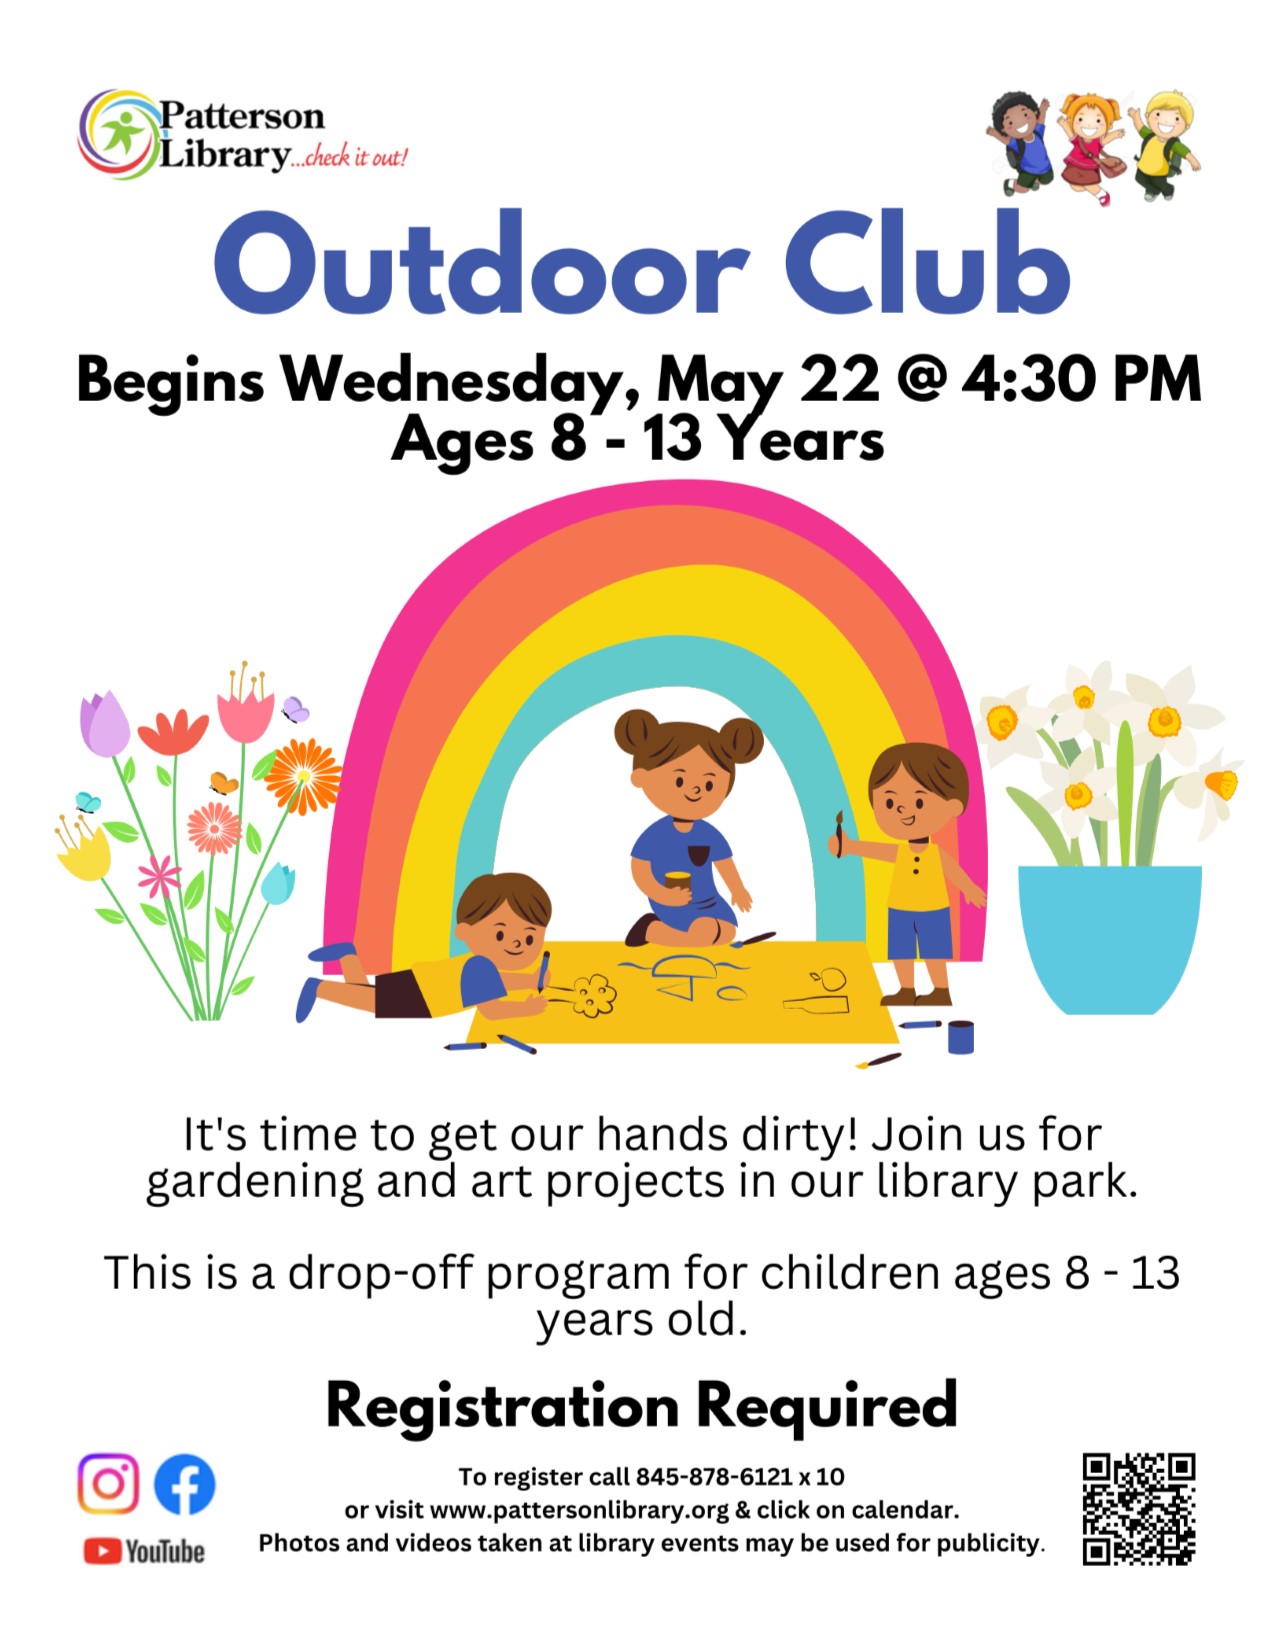 Come join us for gardening and art projects 